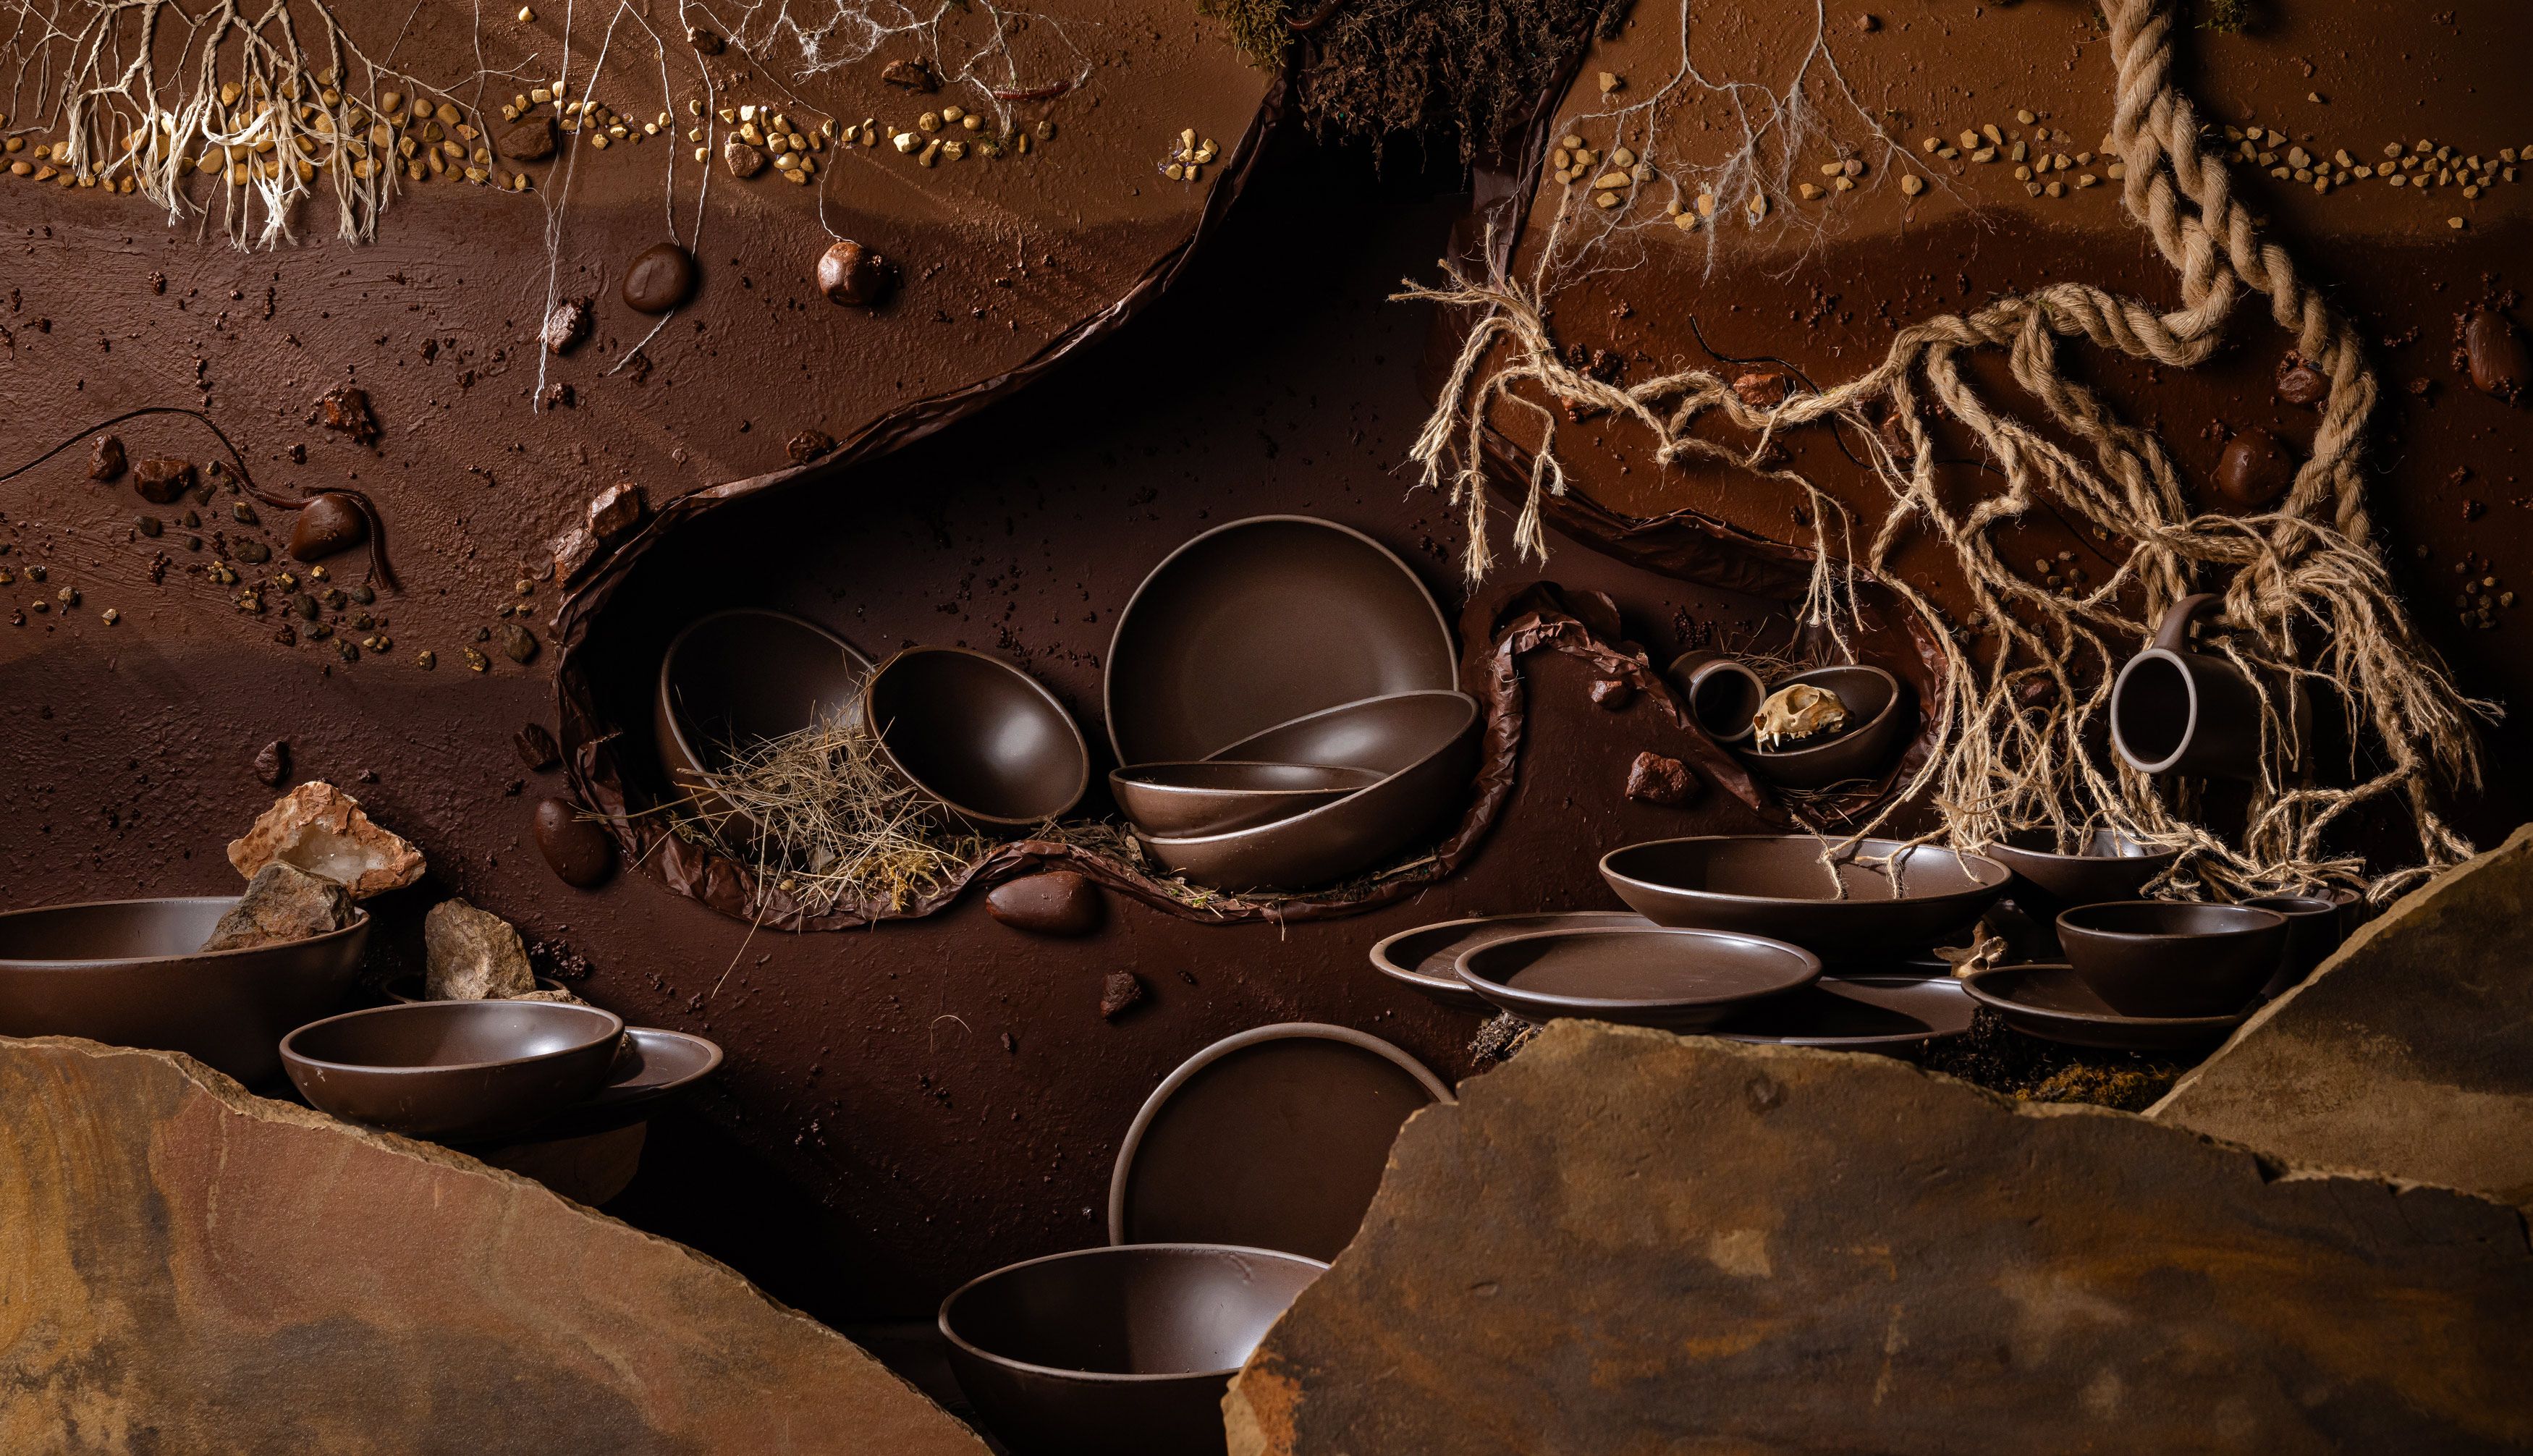 Earthy ground environment with tree roots, rocks, and dirt with various plates and bowls in a dark brown. 